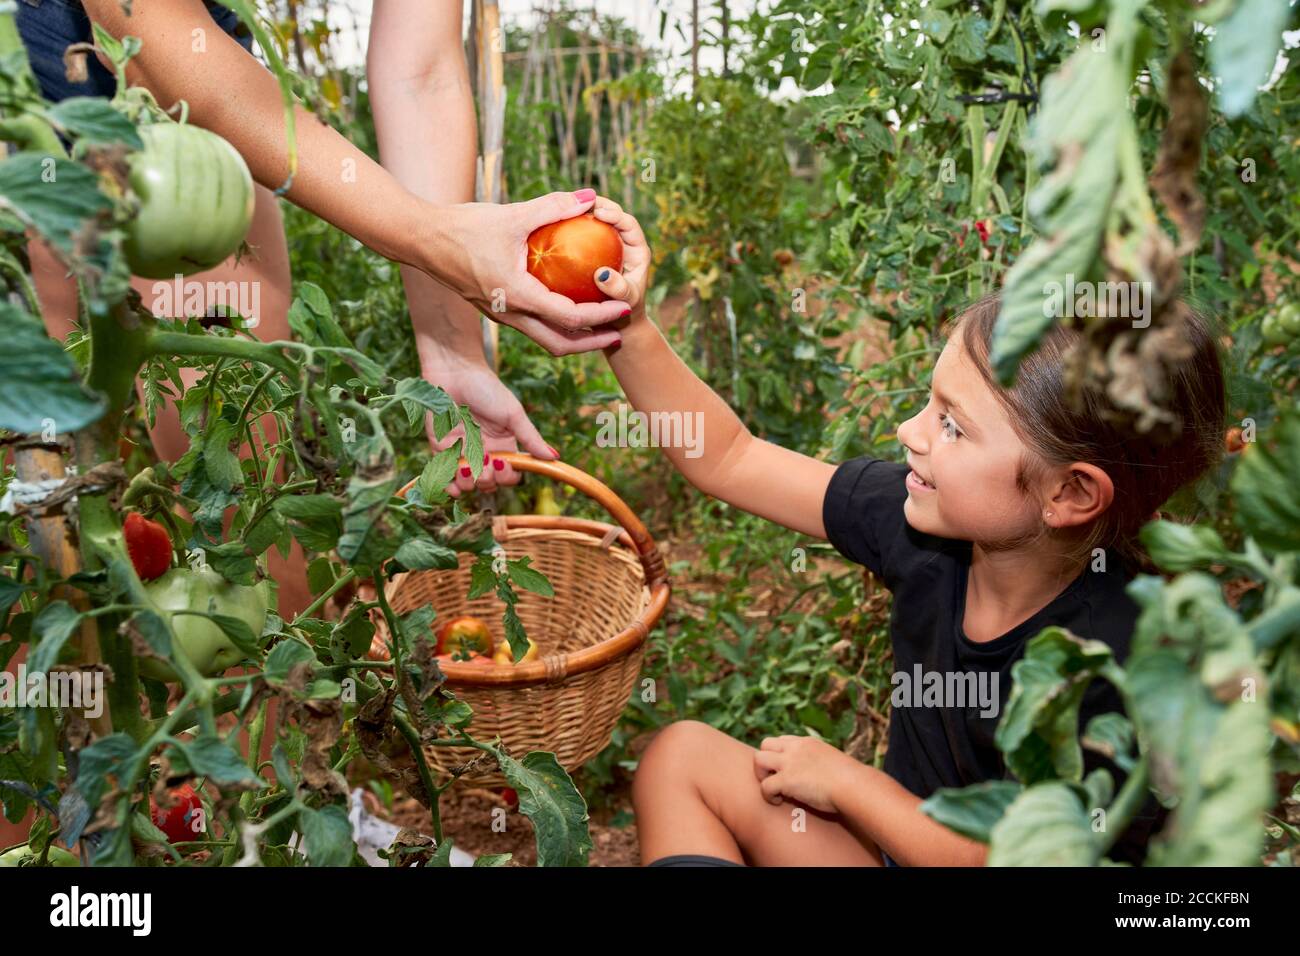 Daughter giving her mother a harvested tomato Stock Photo